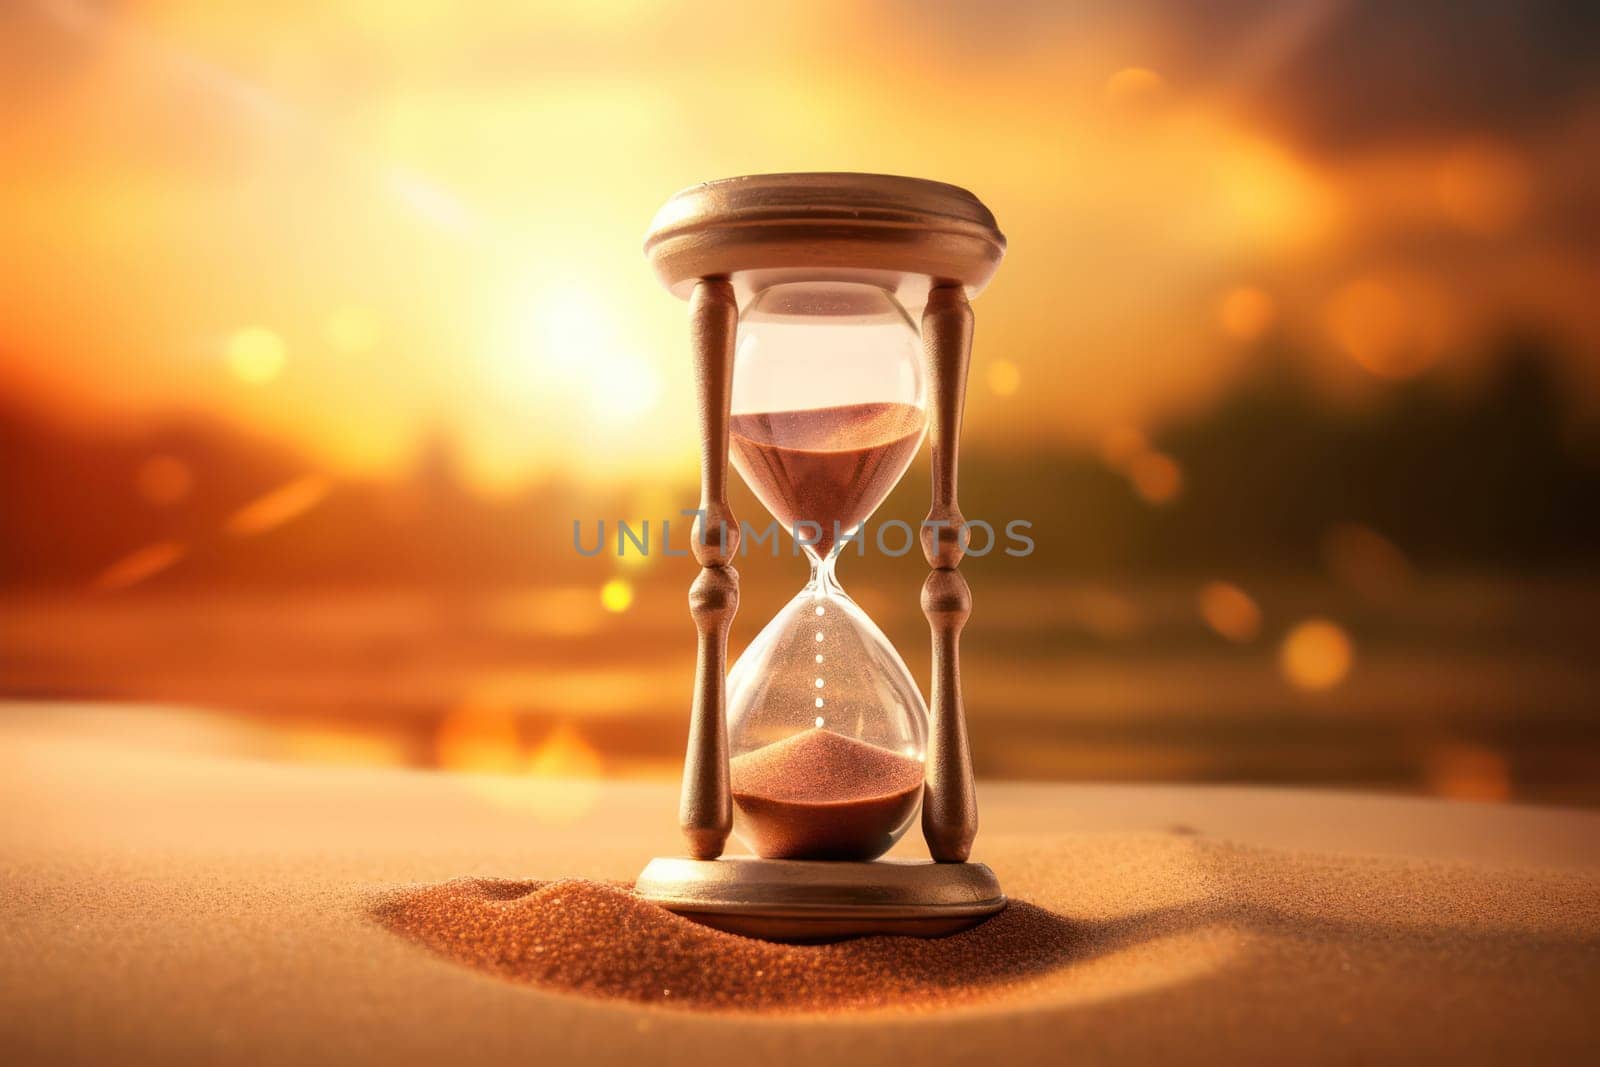 Time Passing: A Retro Vintage Hourglass measuring the Speed of Business Pressure with a Close-up View on Falling Sand, Symbolizing Urgency and Stress in a Tranquil Sunset Background